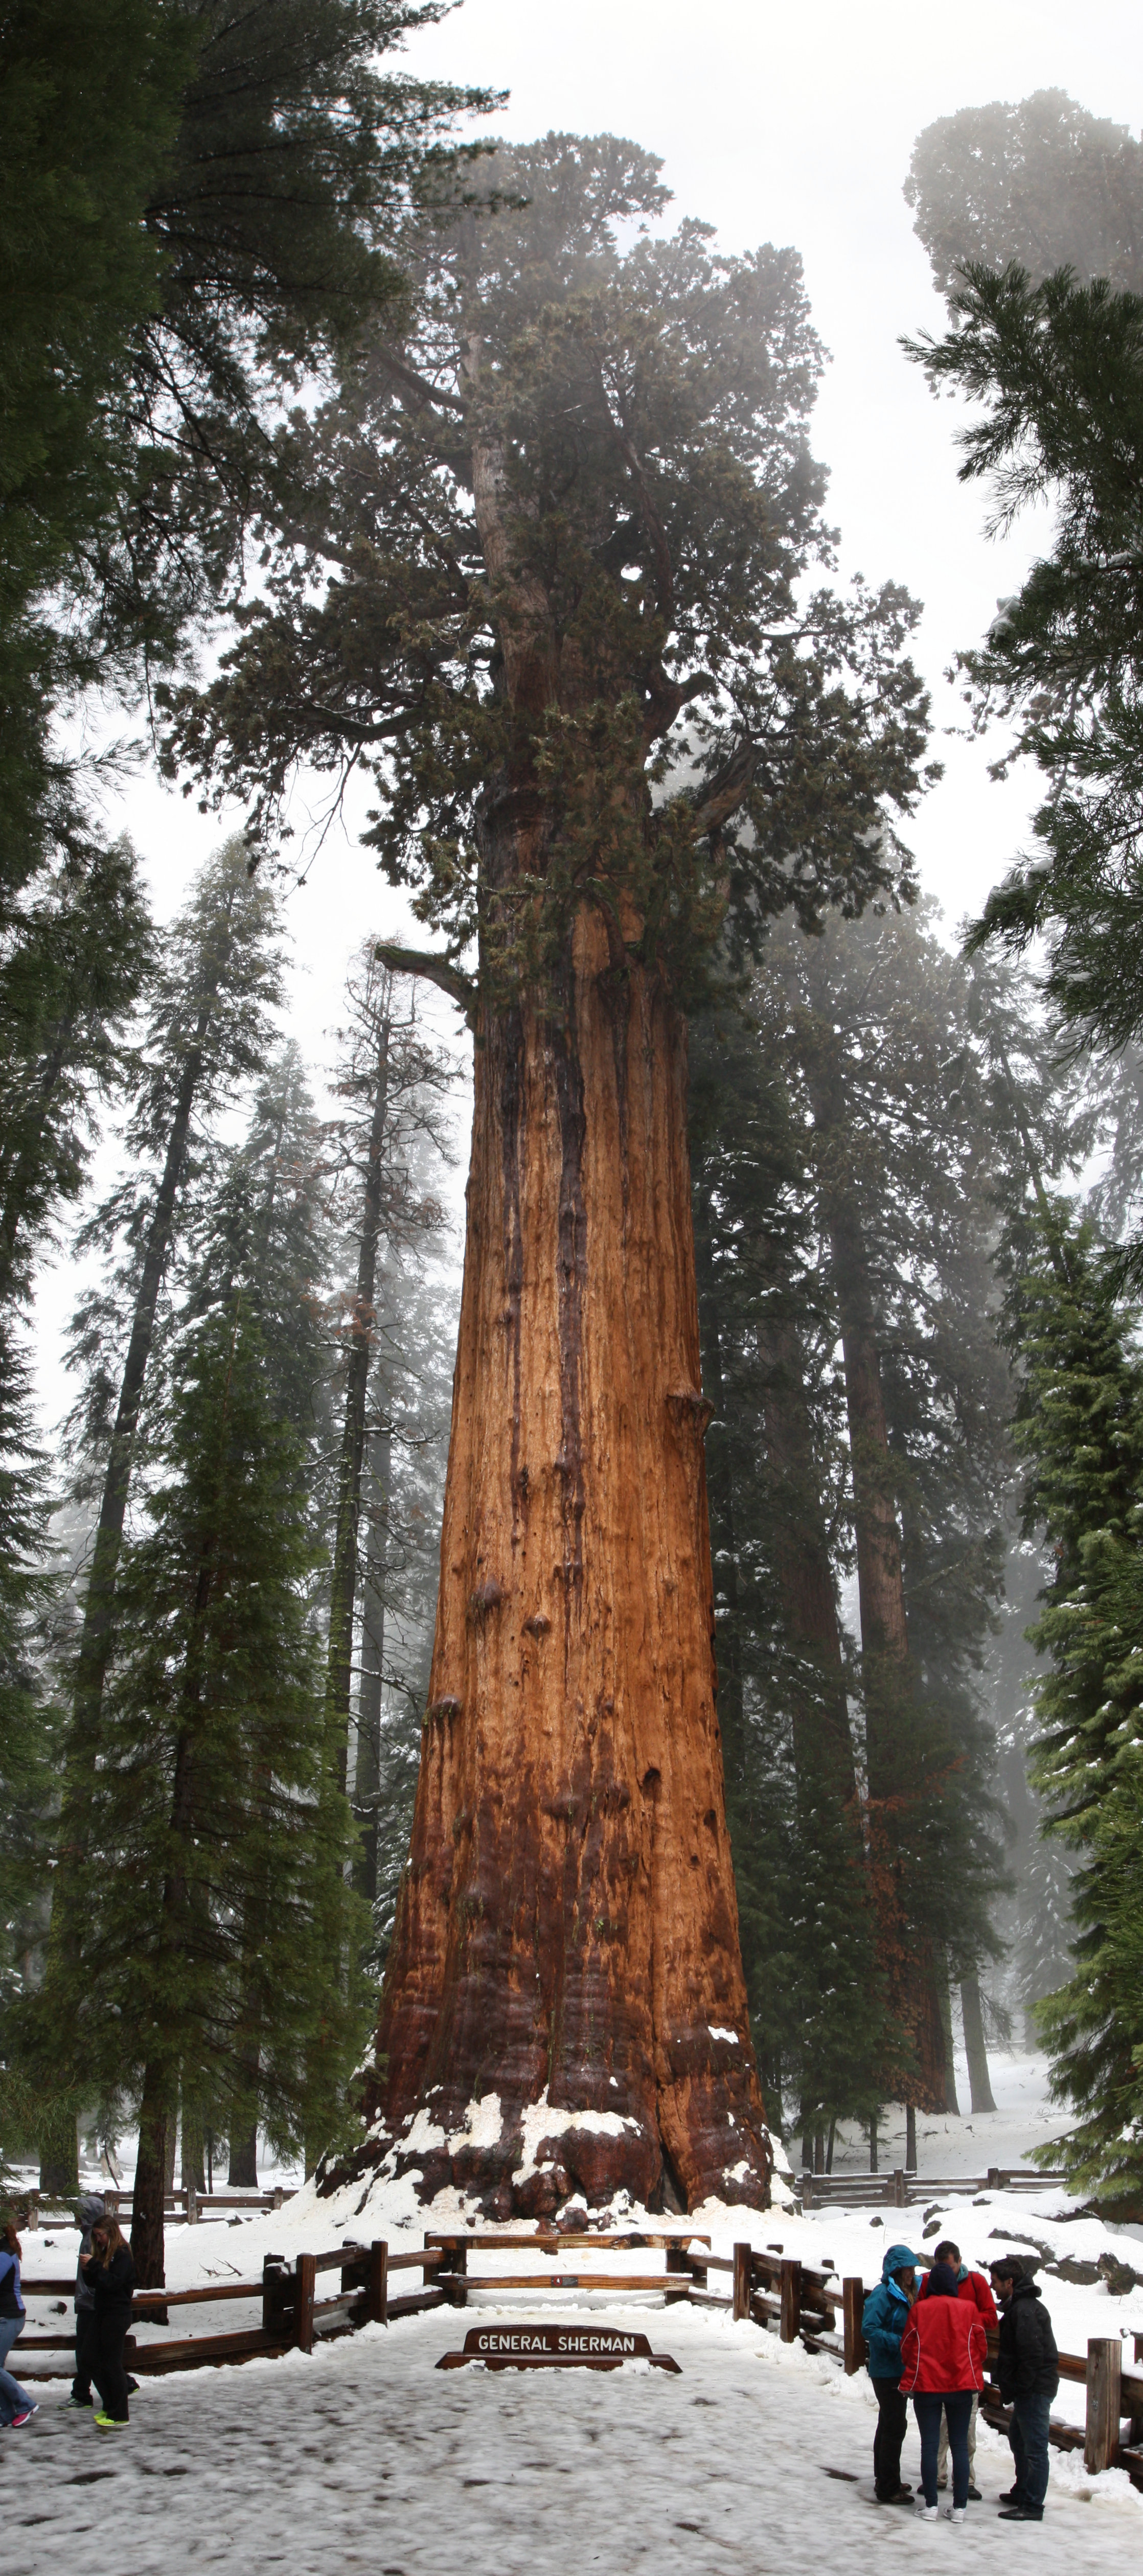 The General Sherman tree in Sequoia National Park is the largest known living single stem tree on Earth. It measures 102.6 feet in circumference at its base and weighs an estimated 1,910 tons. Photo by Mark Doliner via Flickr.